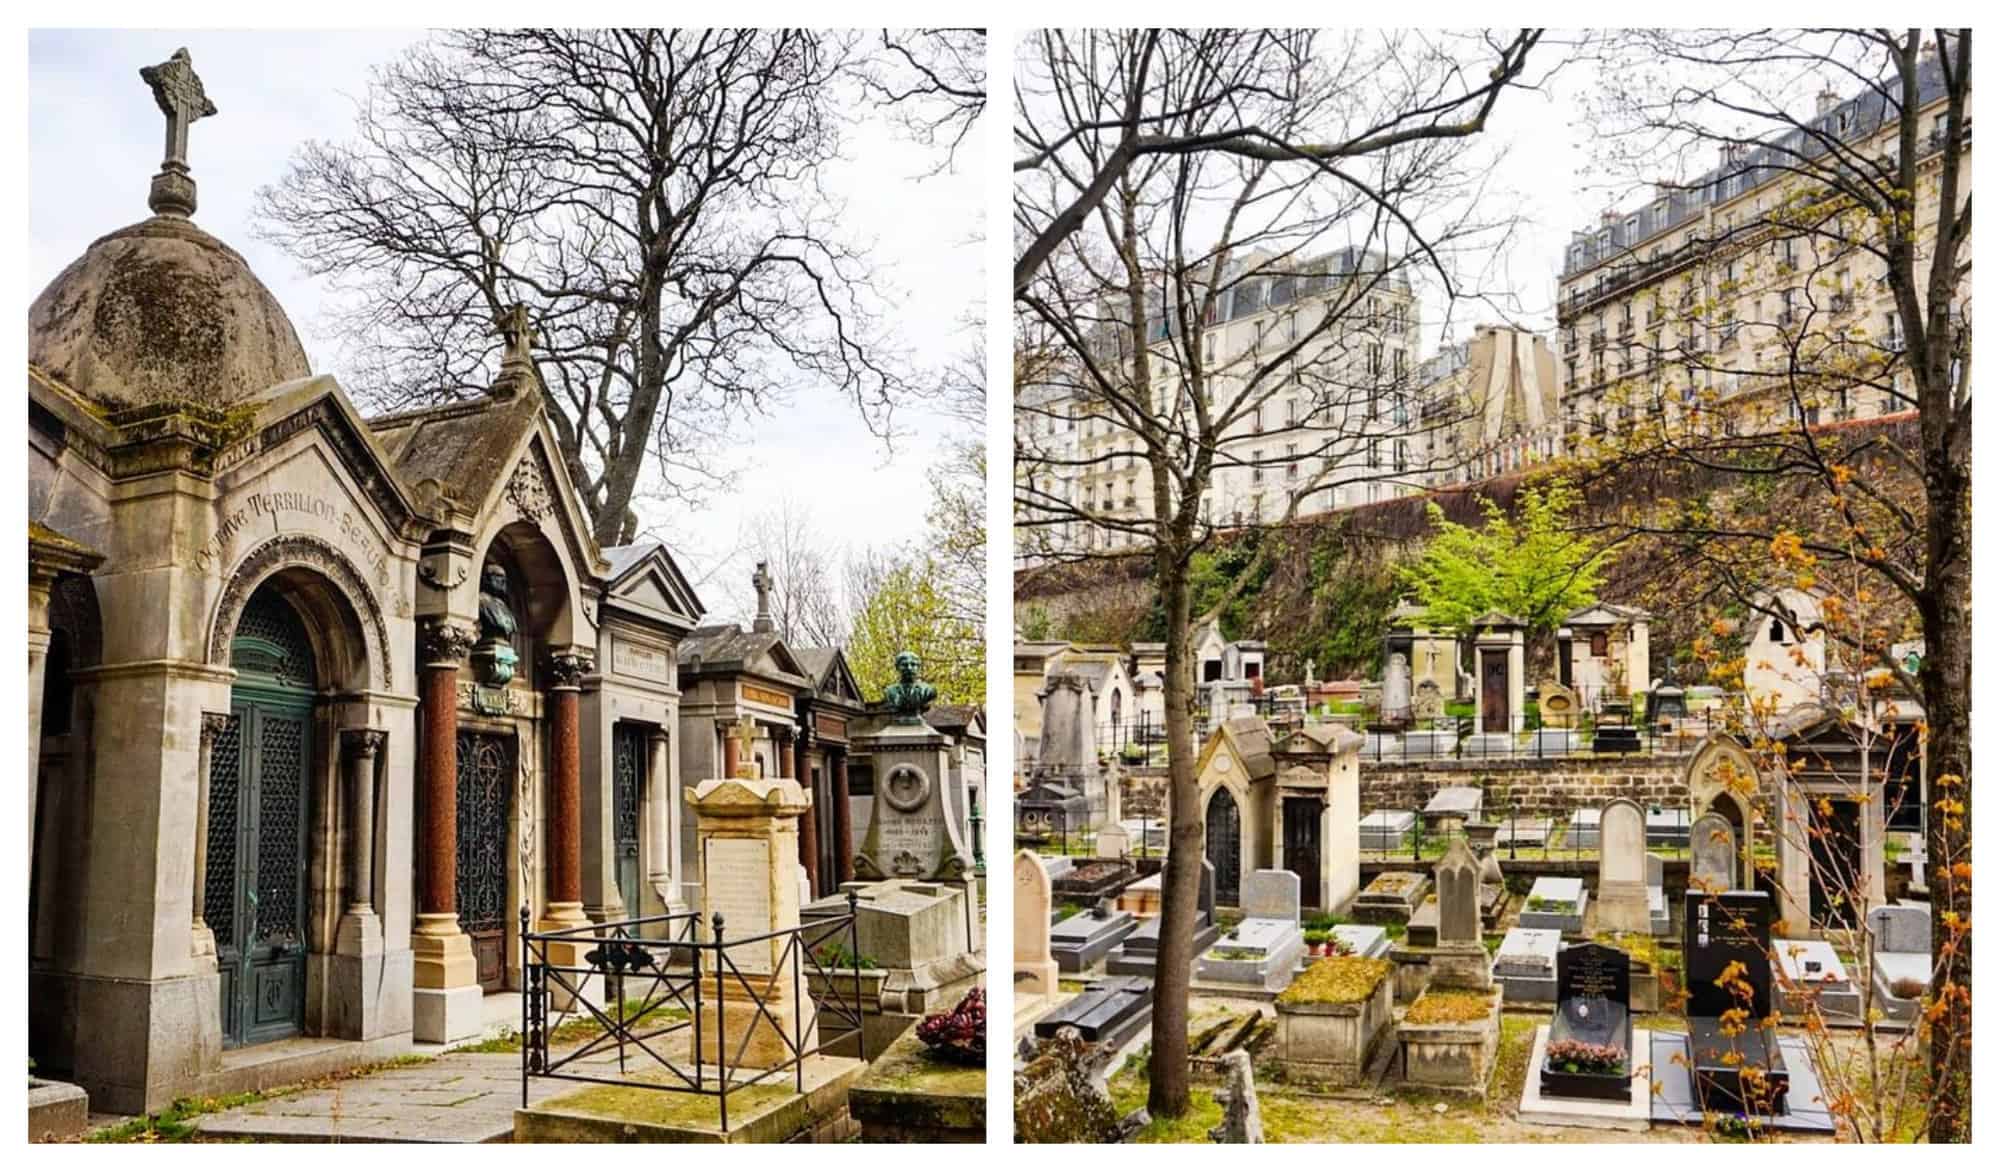 2 pictures of the Montmartre cemetery in the fall with tombstones and trees with crisp, brown leaves.